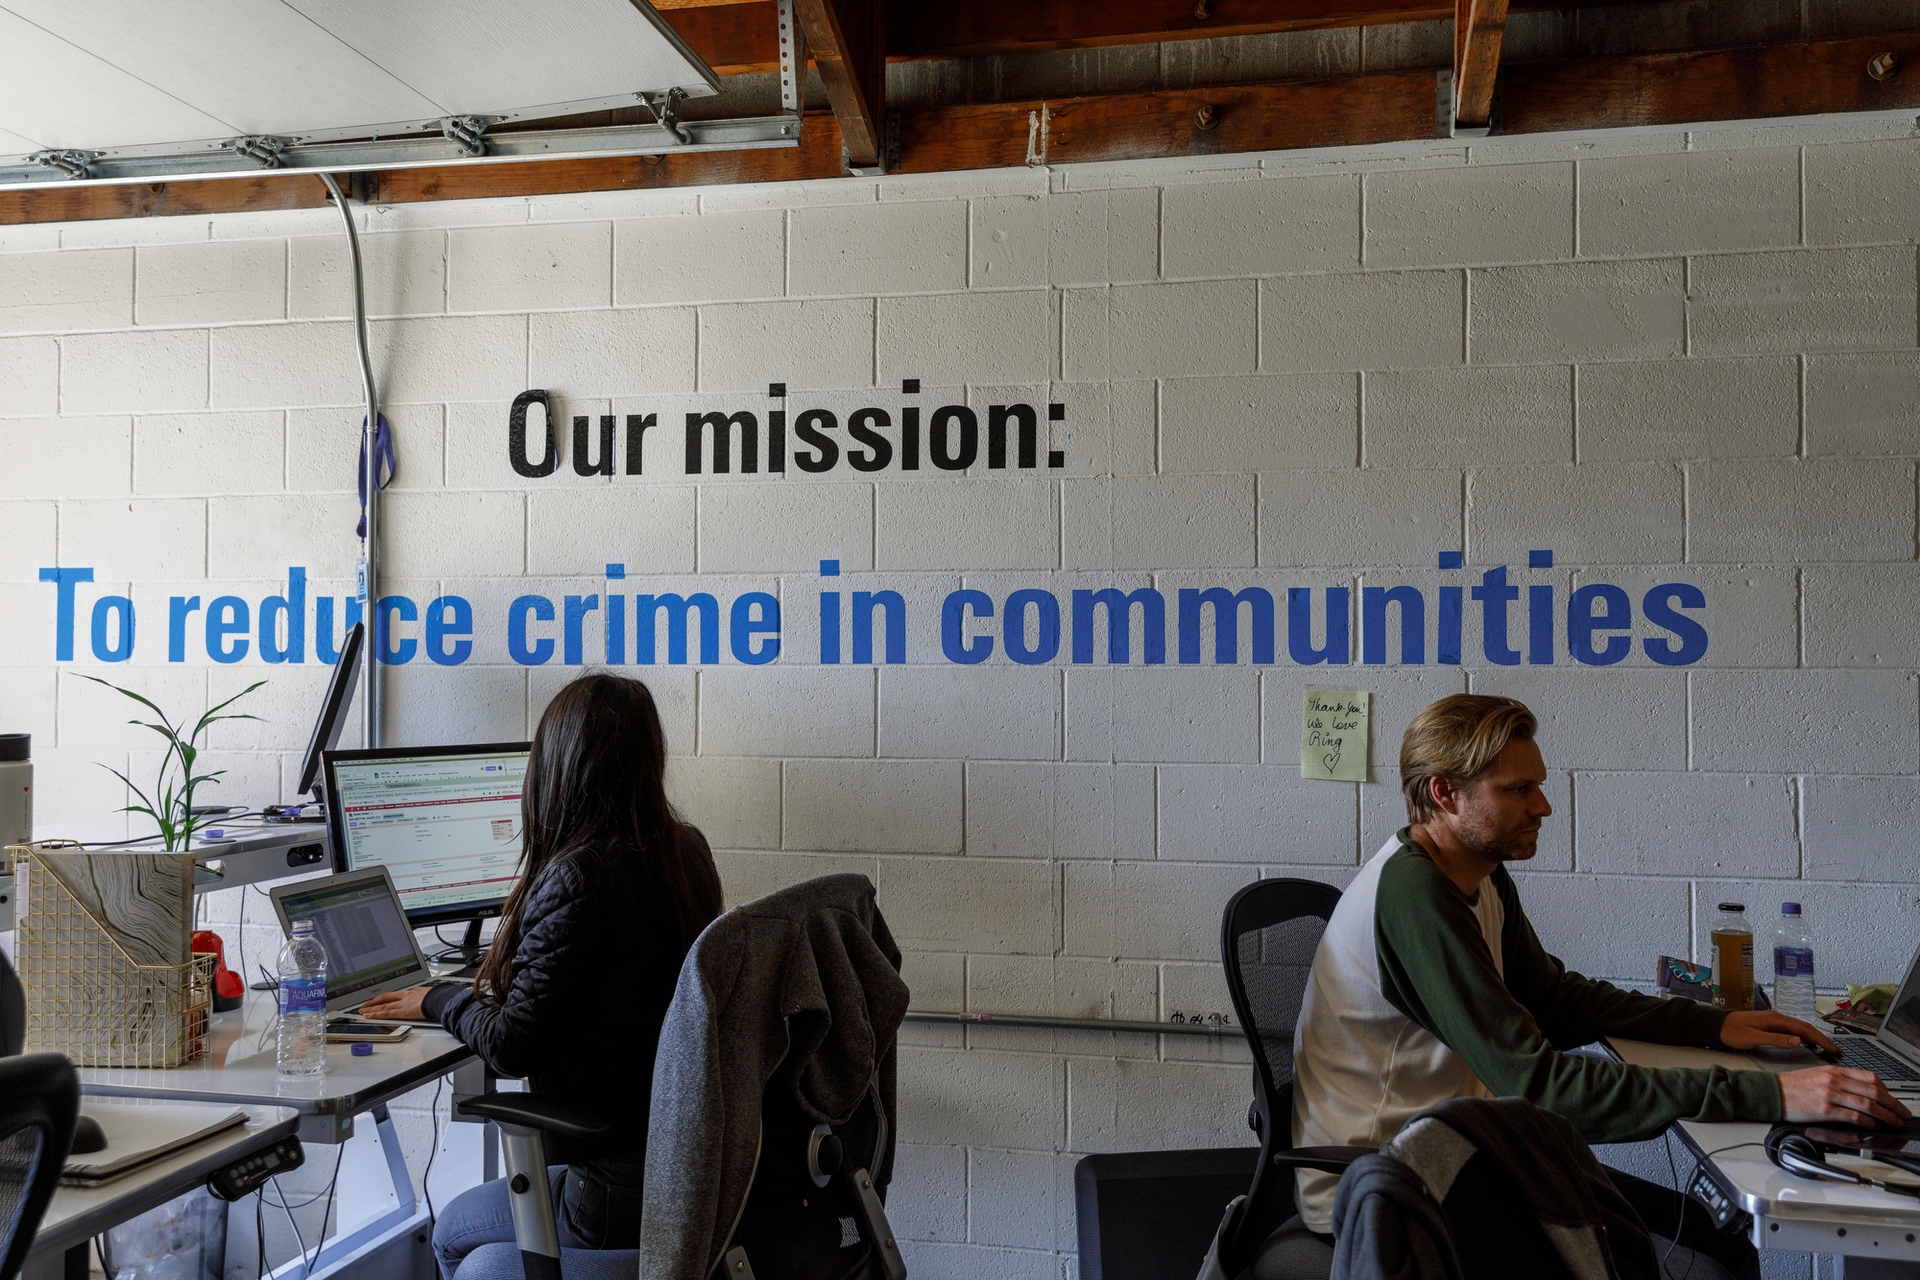 Wall art at Ring headquarters reads 'Our mission: To reduce crime in communities.'